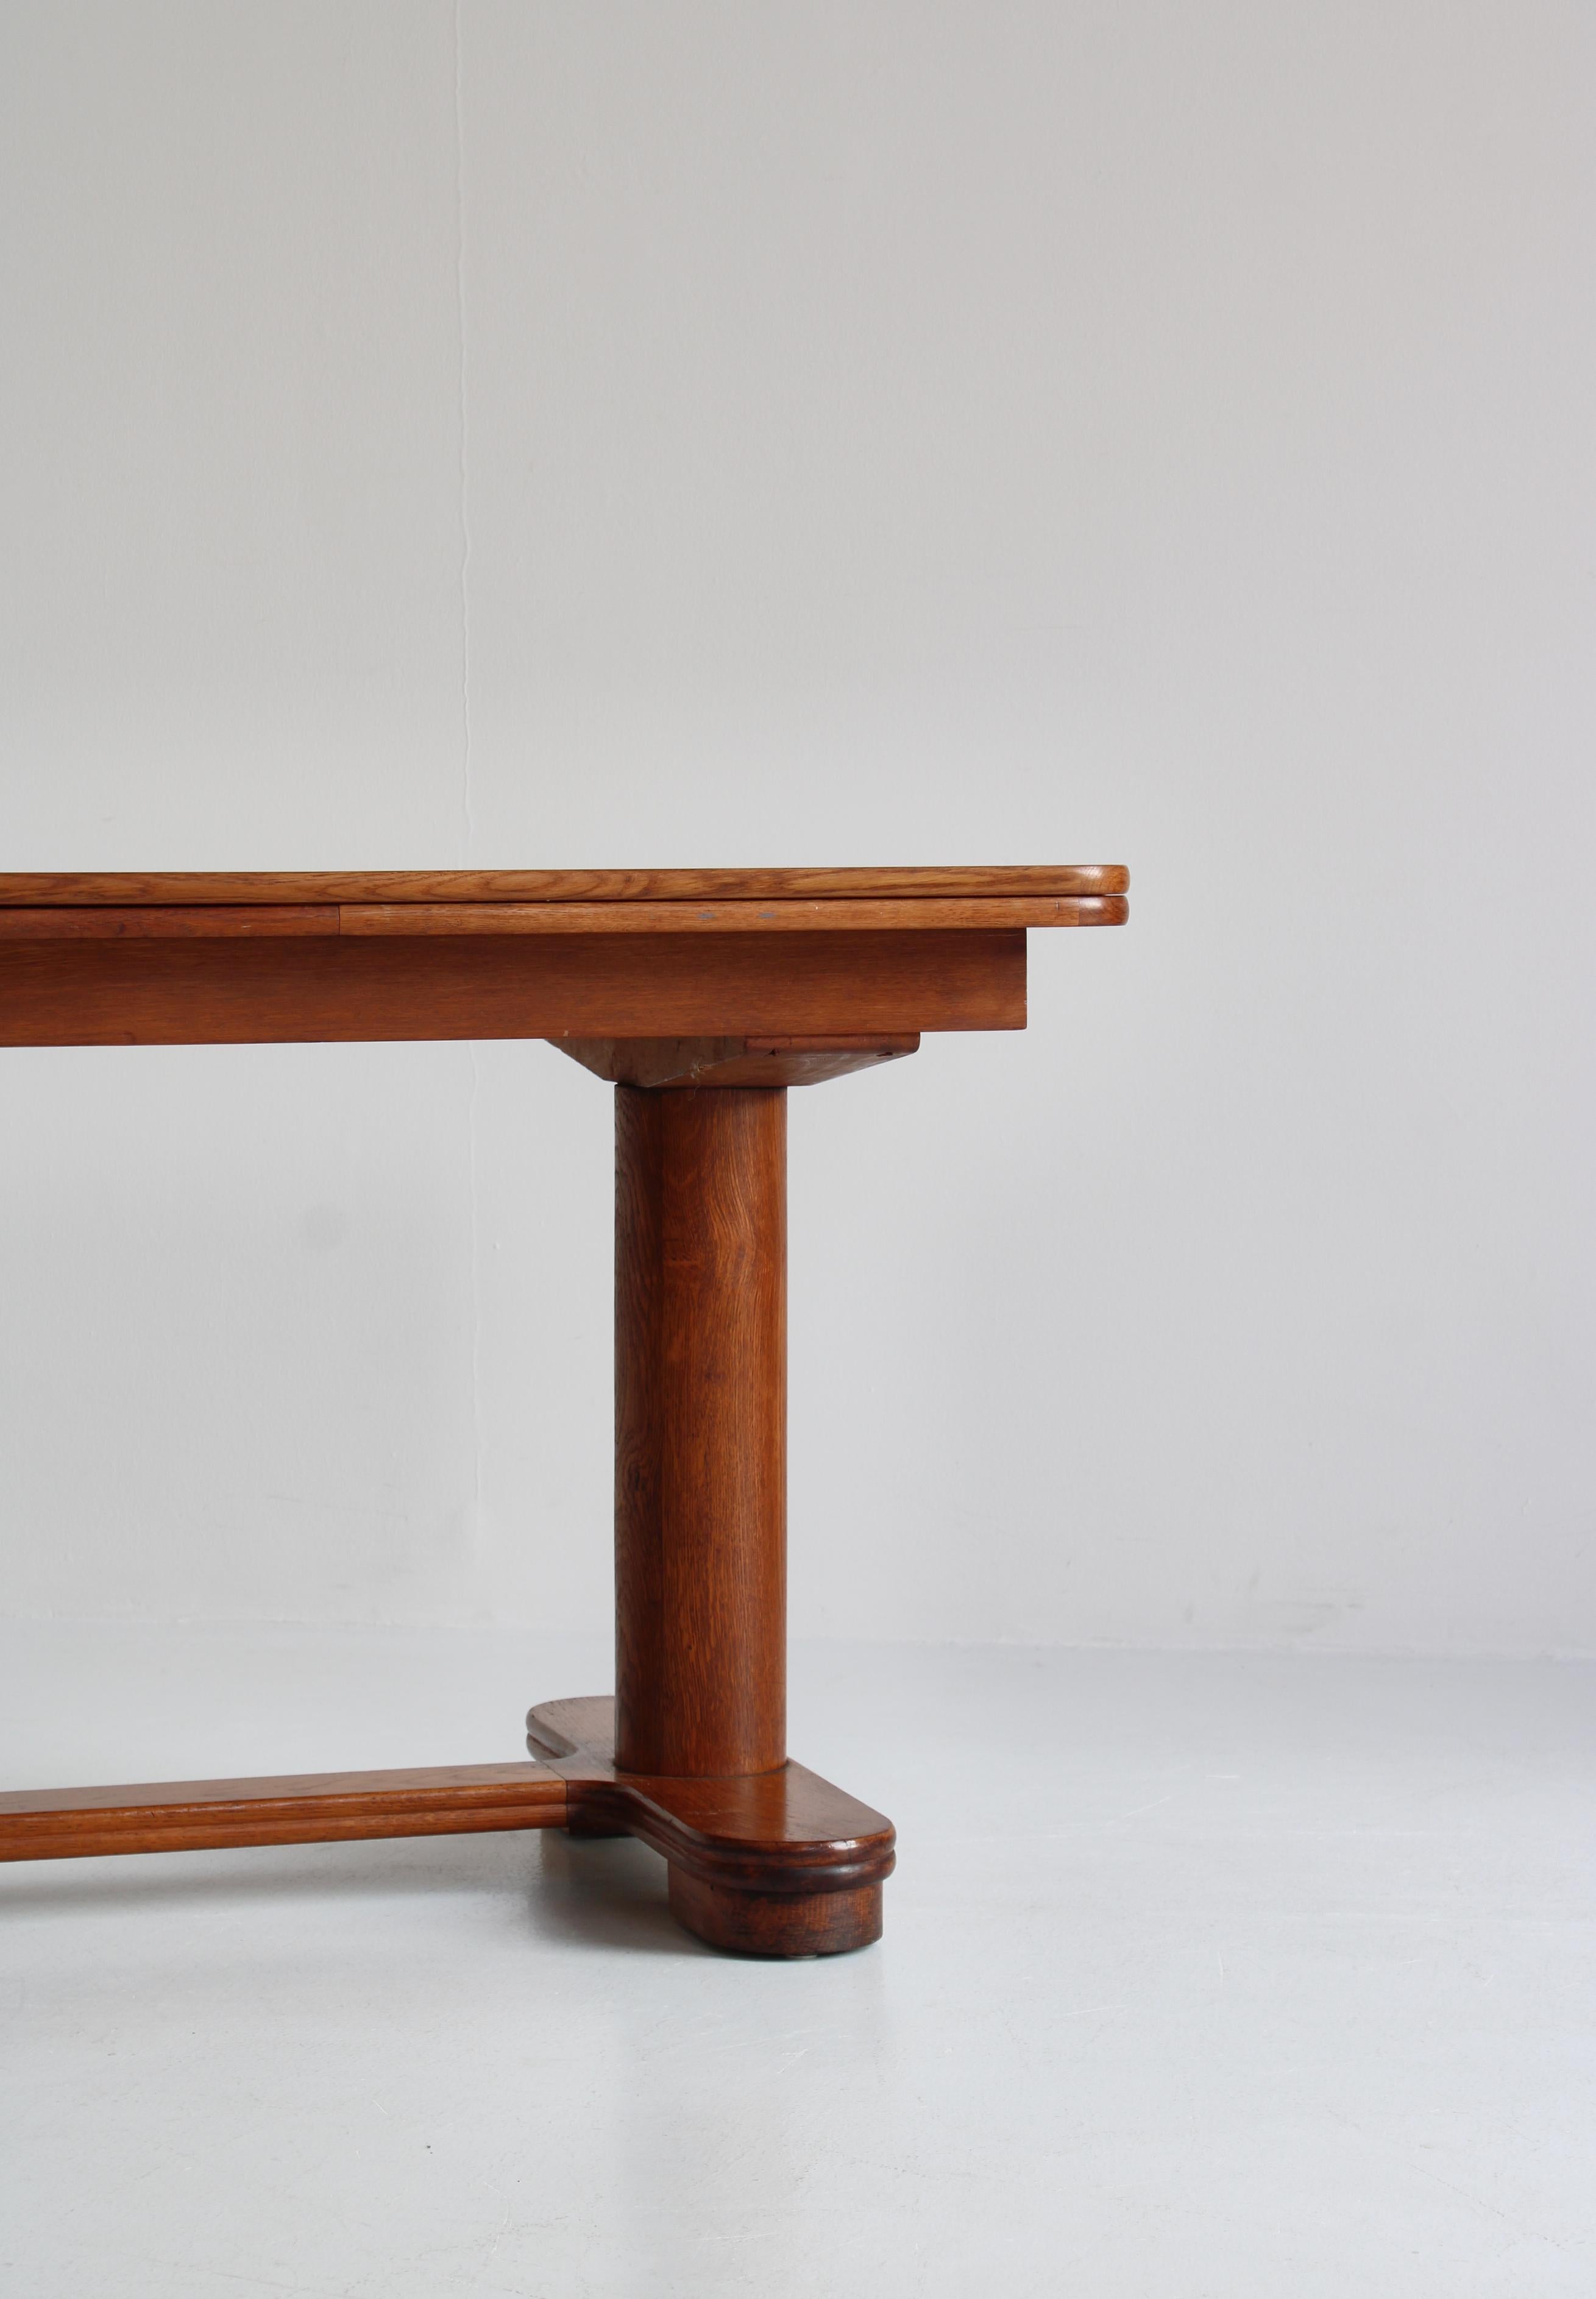 Art Deco Table by Danish Cabinetmaker in Patinated Oak, 1930s For Sale 4